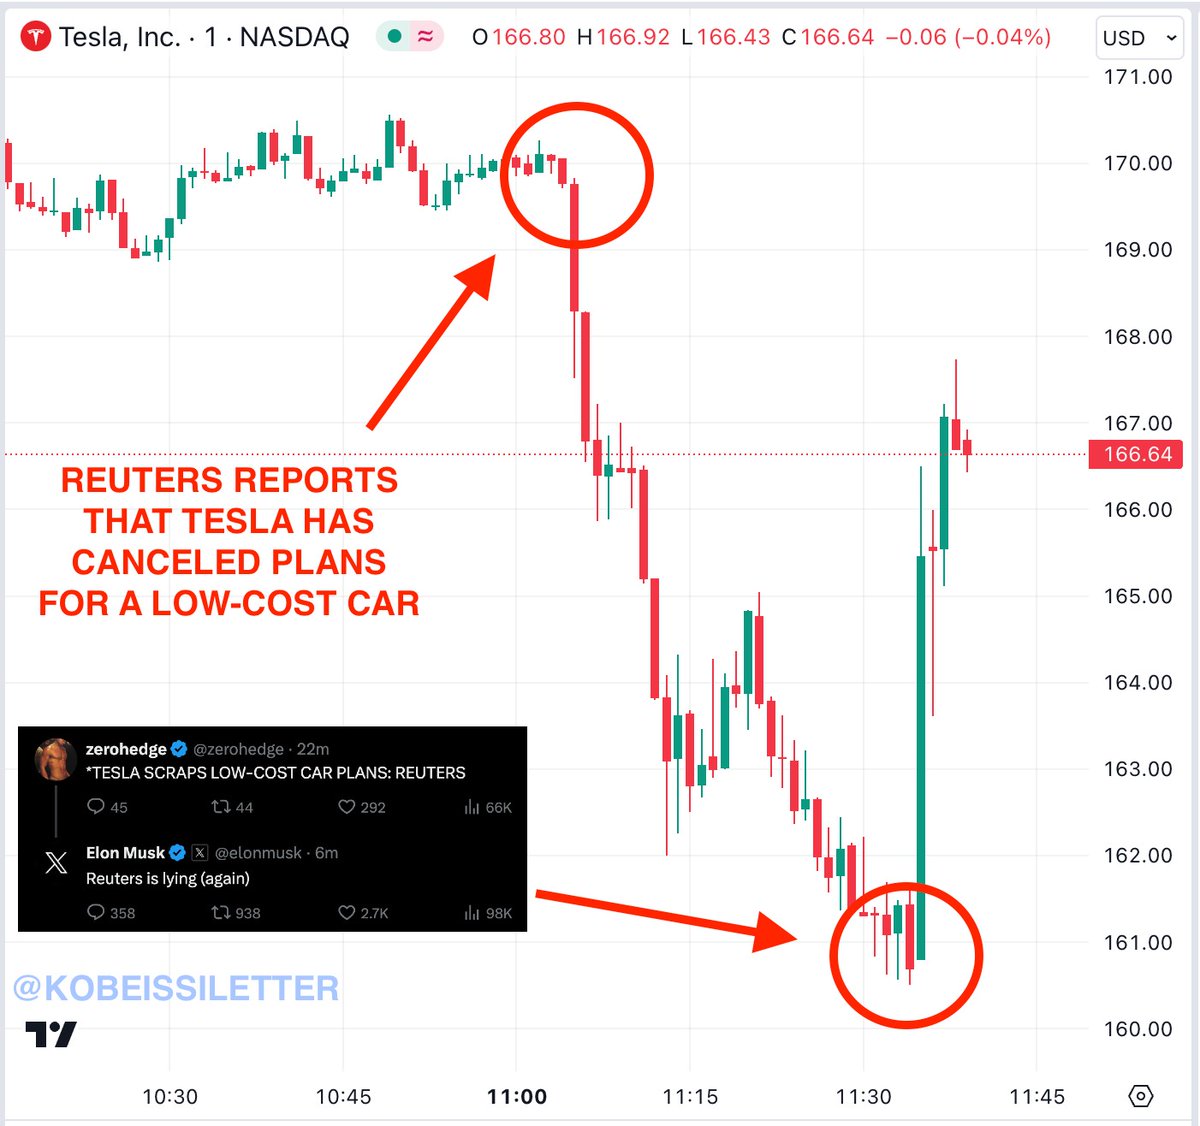 You can't make this up: At 11:05 AM ET, Tesla stock, $TSLA, fell nearly 6% after Reuters reported that the company cancelled plans for a low cost car. 30 minutes later, at 11:35 AM ET, @elonmusk posted that 'Reuters is lying (again).' The stock quickly recovered gaining ~4% in…